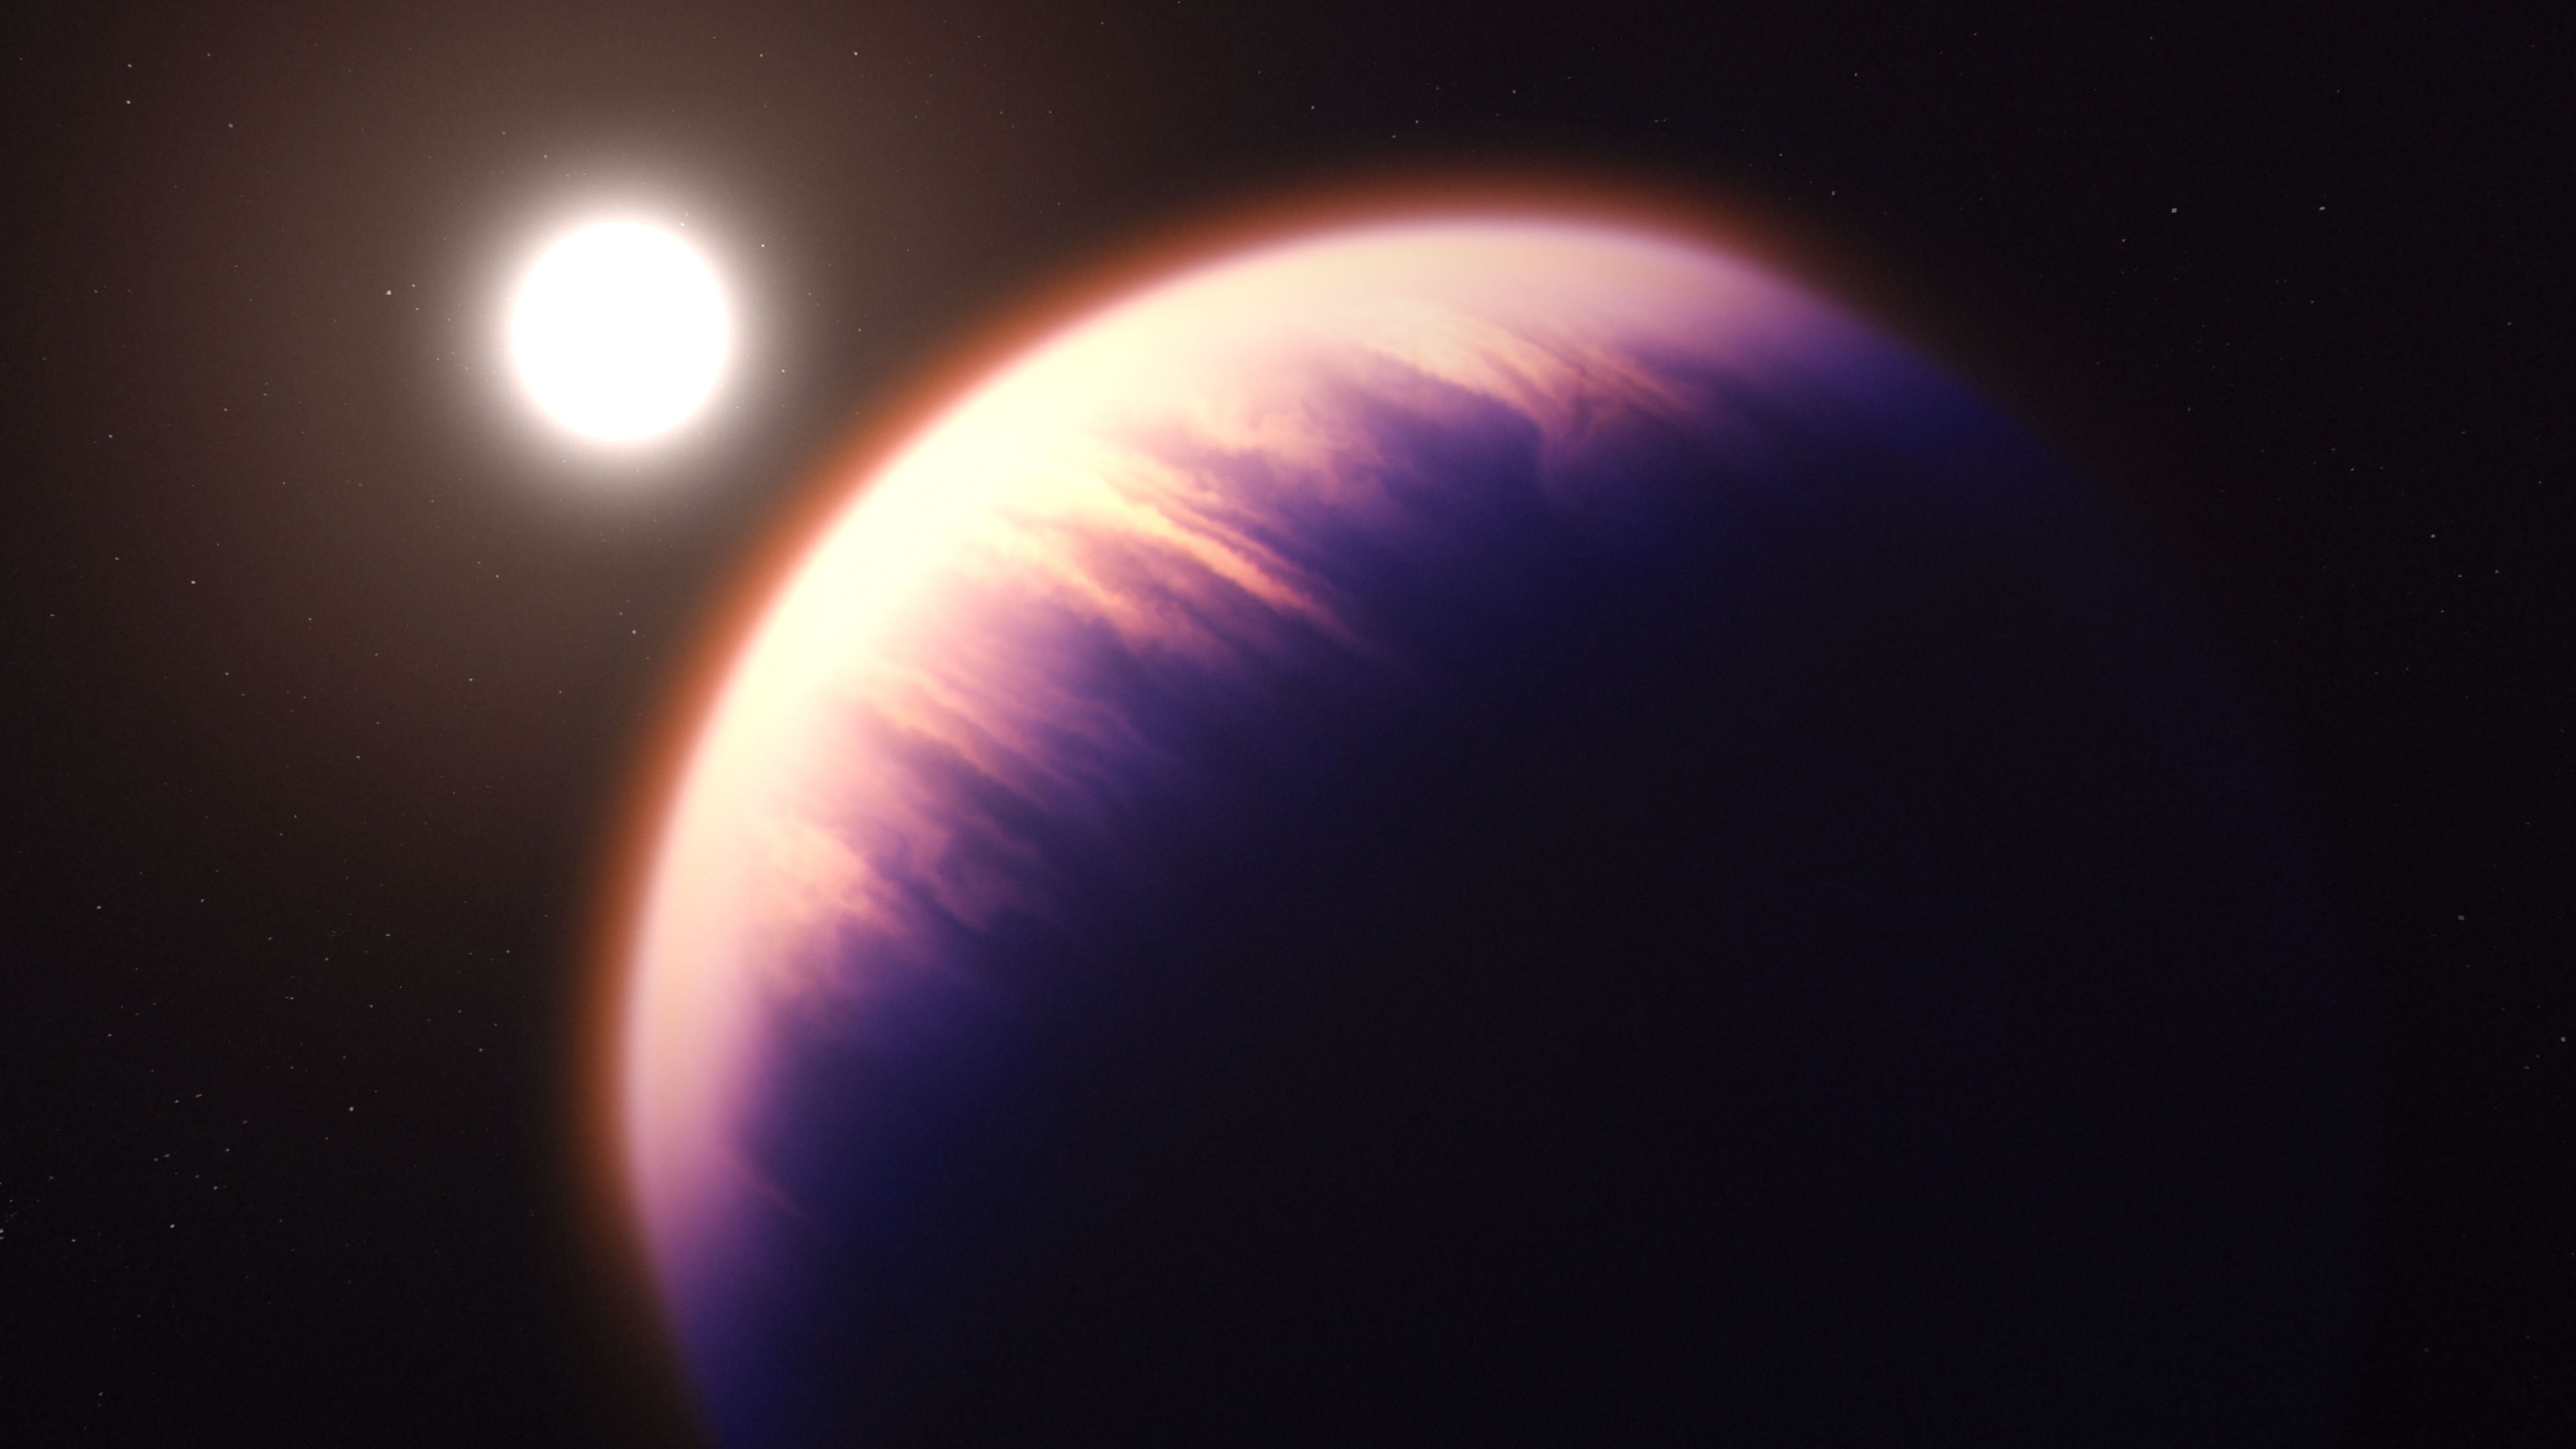 A pinkish planet and its star on an empty black background, with a bright white sun in the background.